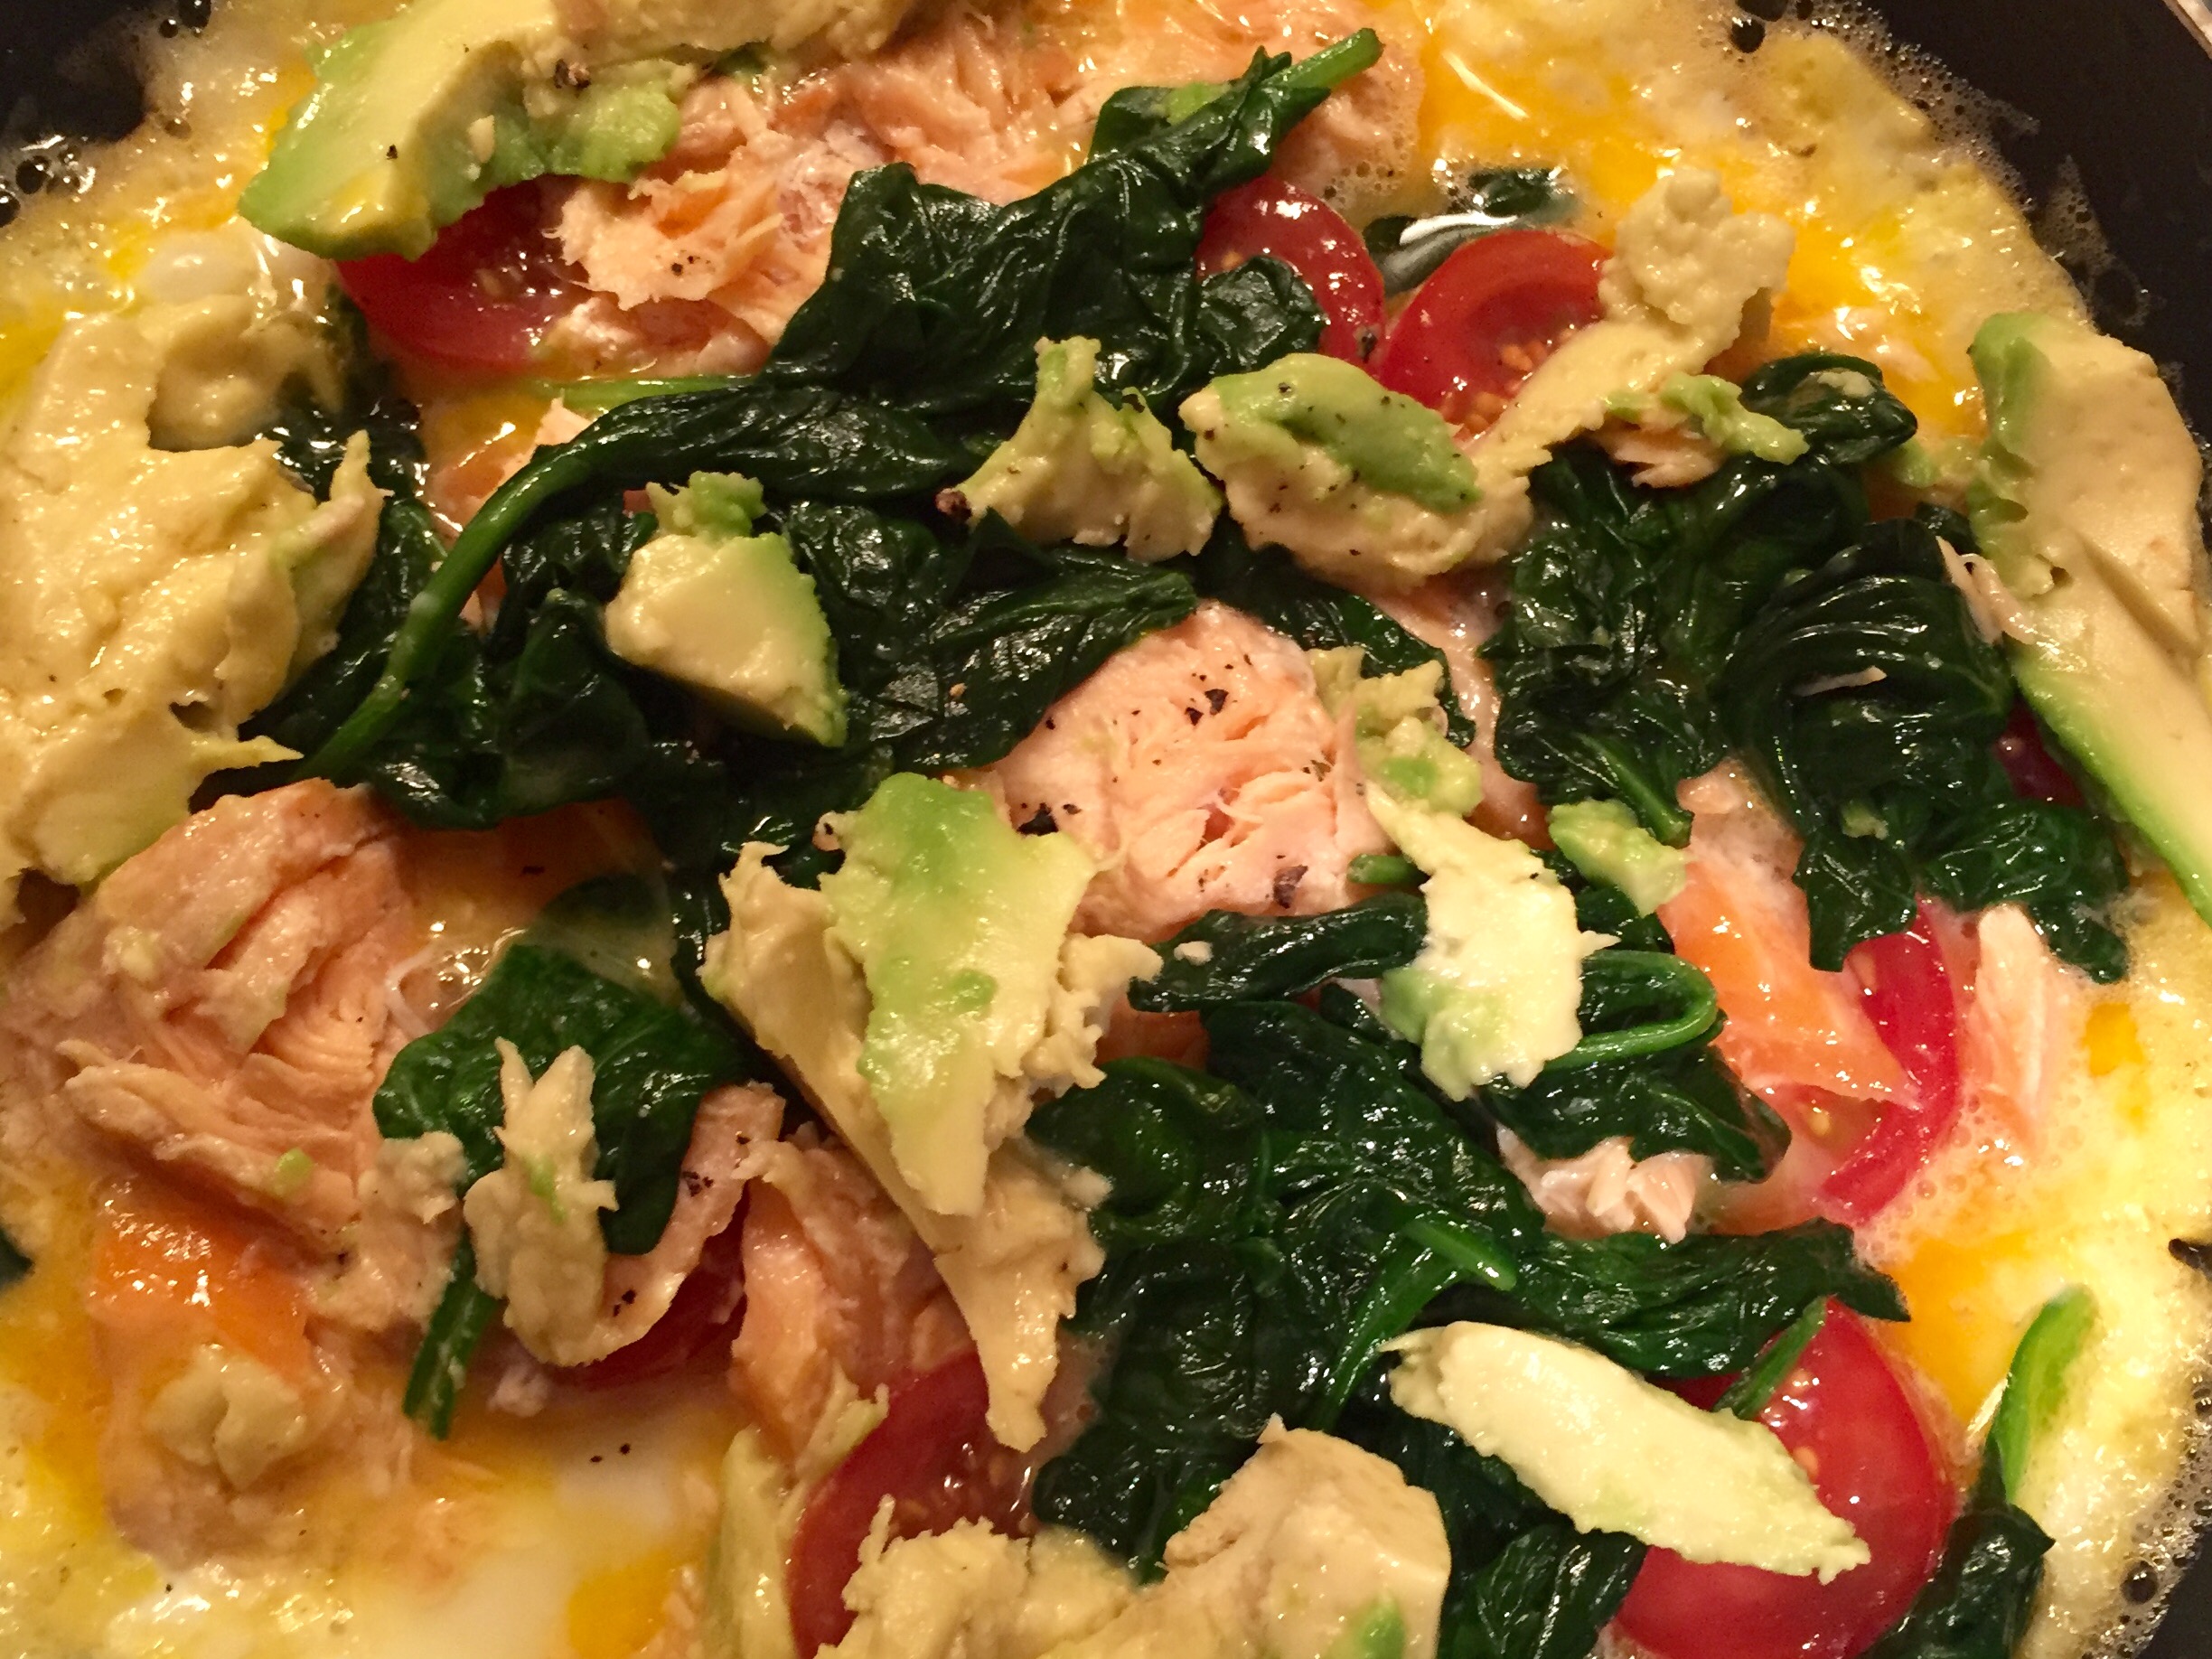 SALMON & SPINACH OMELETTE